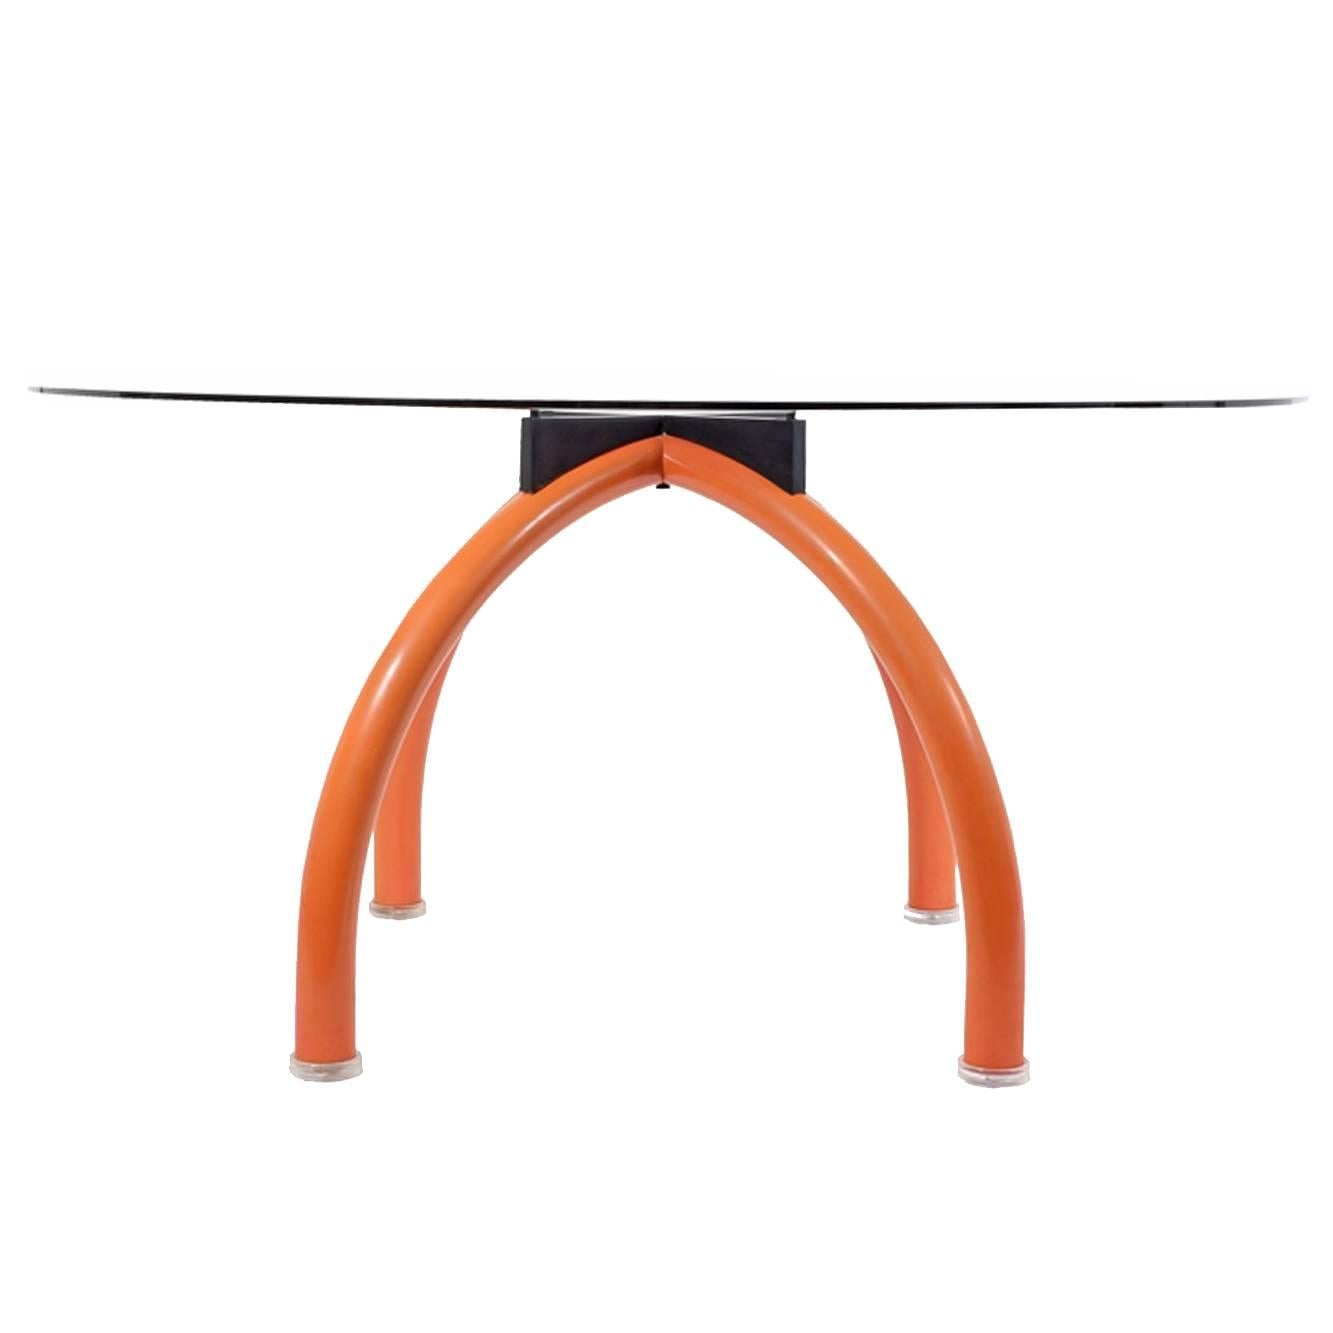 Ettore Sottsass Associati Spider Table for Knoll, 1986